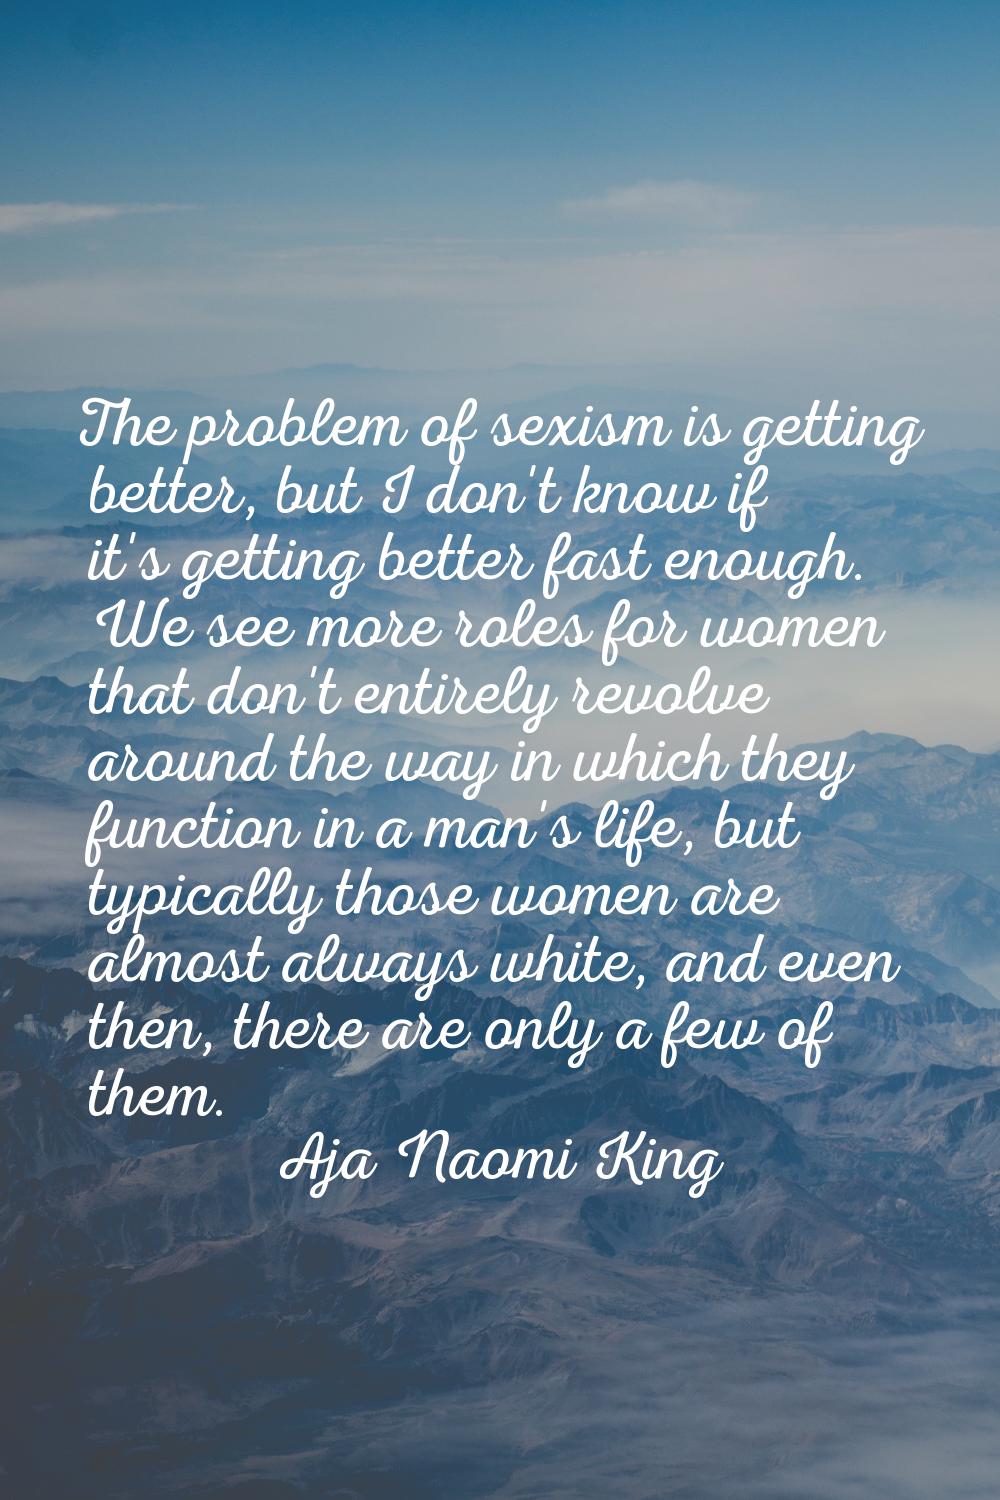 The problem of sexism is getting better, but I don't know if it's getting better fast enough. We se